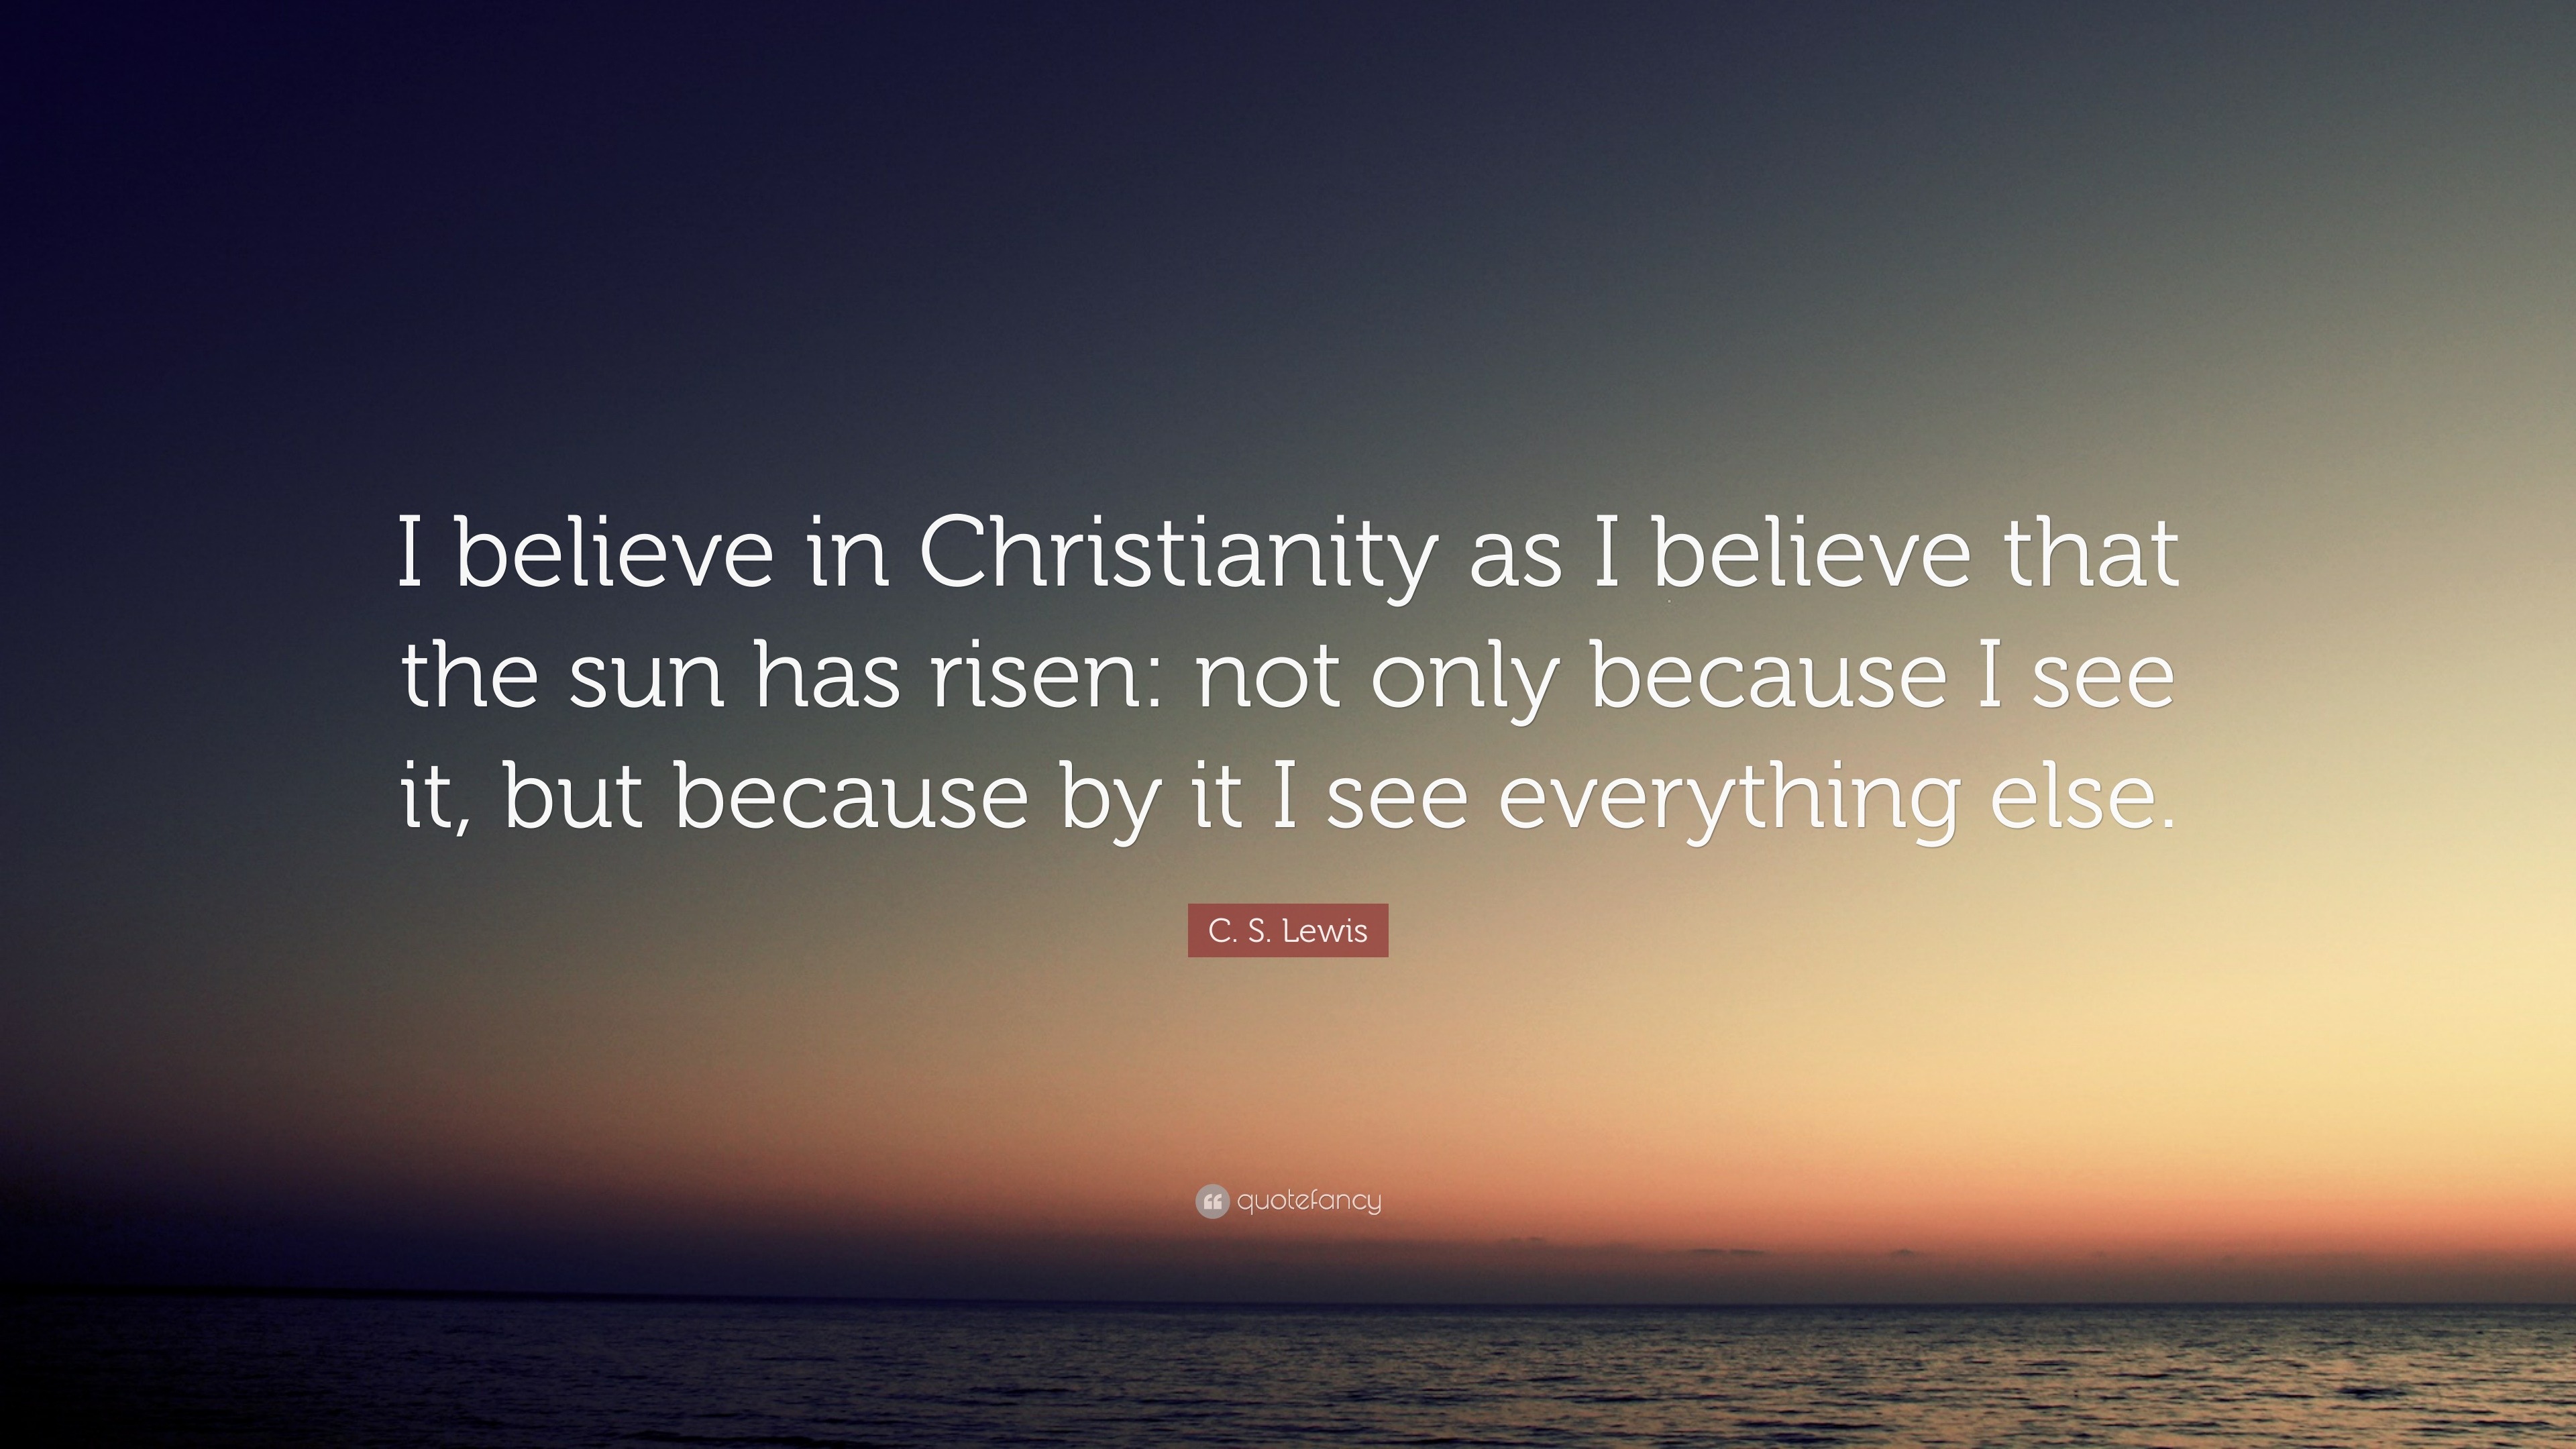 C. S. Lewis Quote: “I believe in Christianity as I believe that the sun